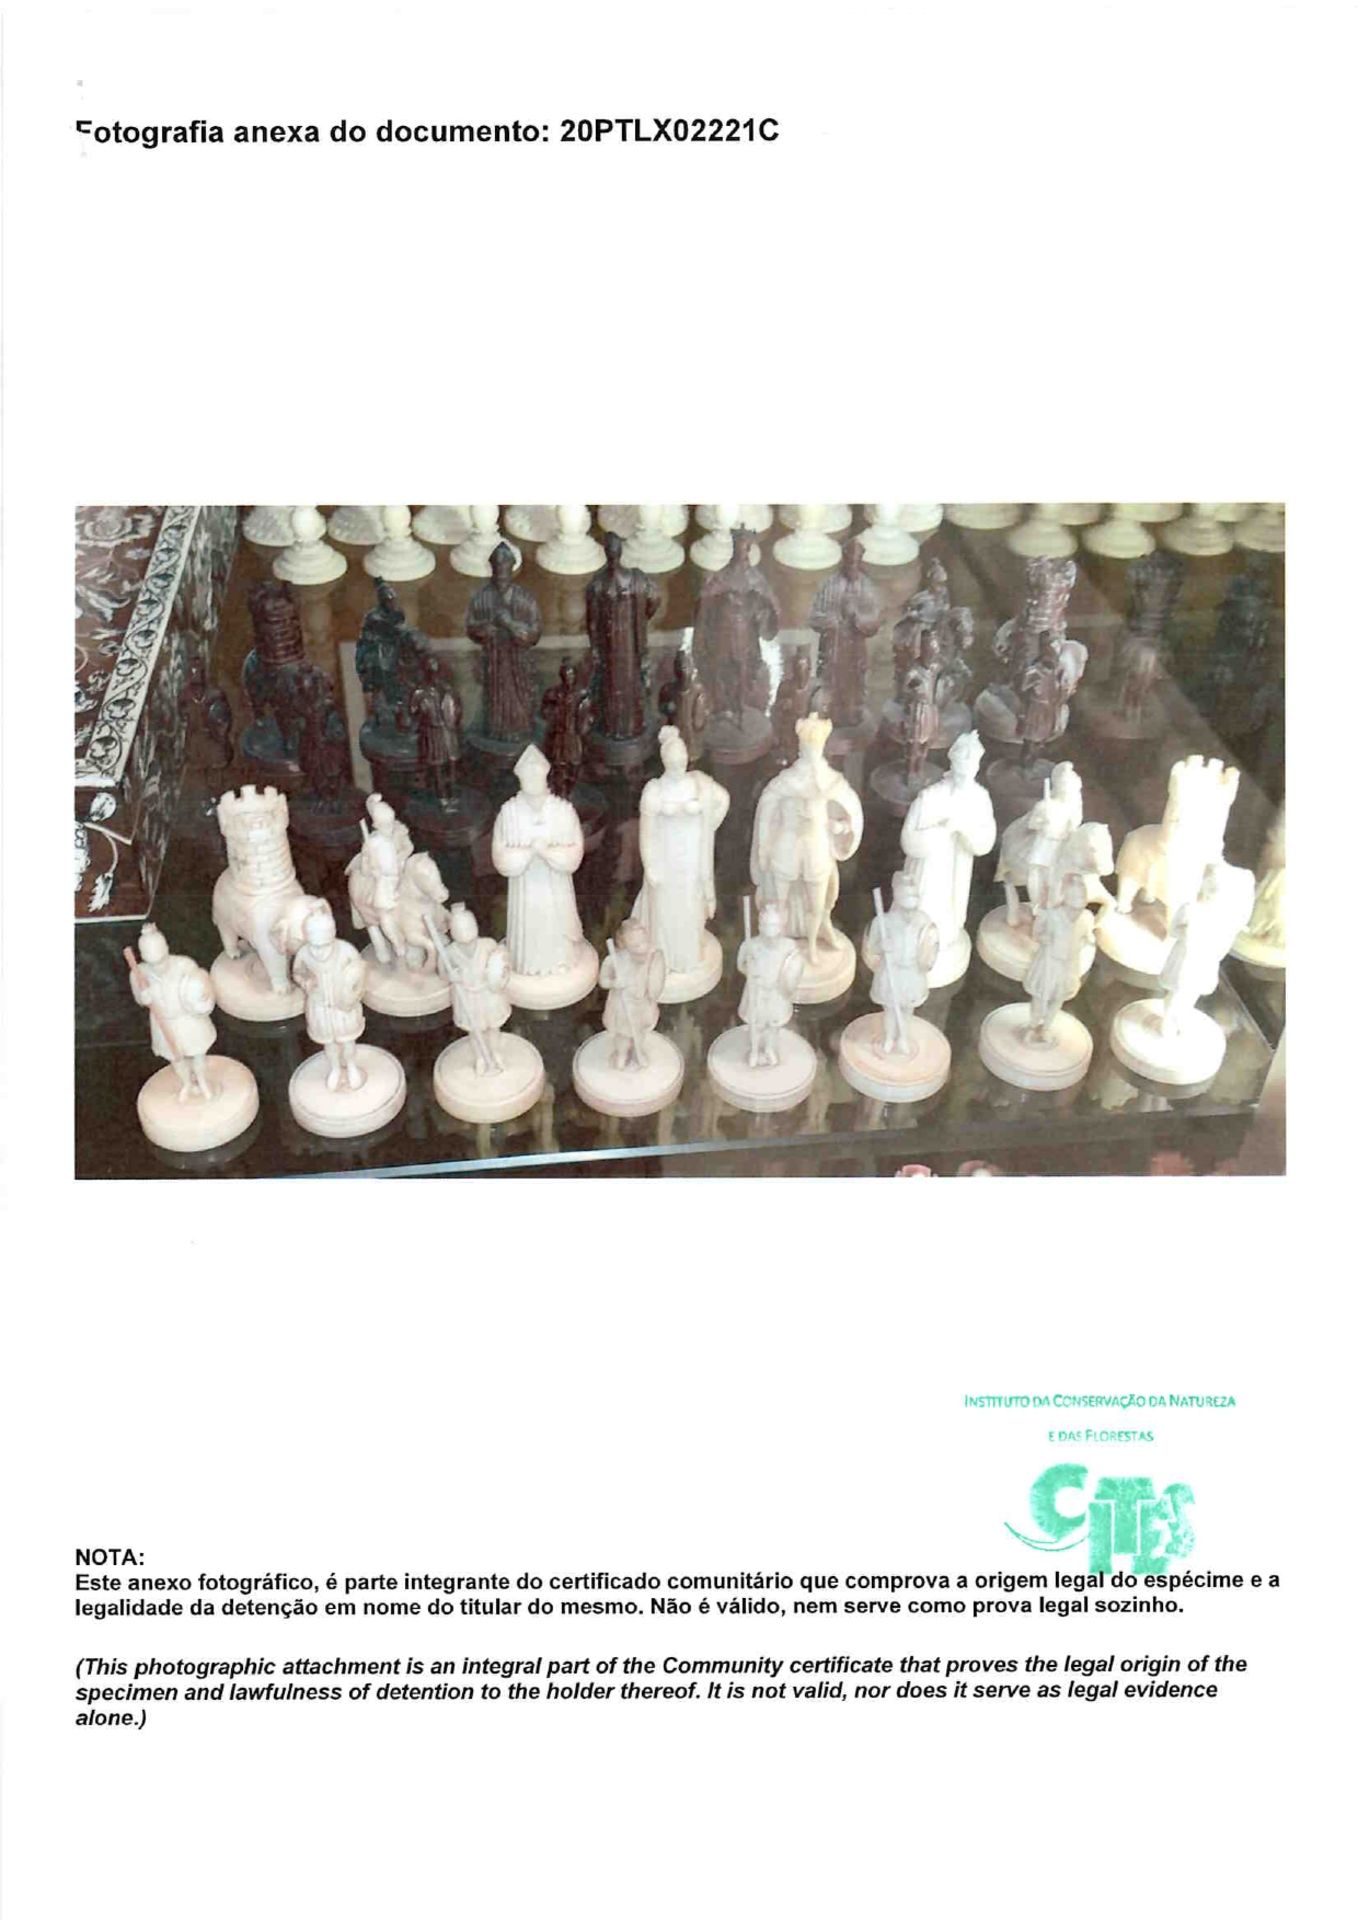 Chess Pieces - Image 8 of 8